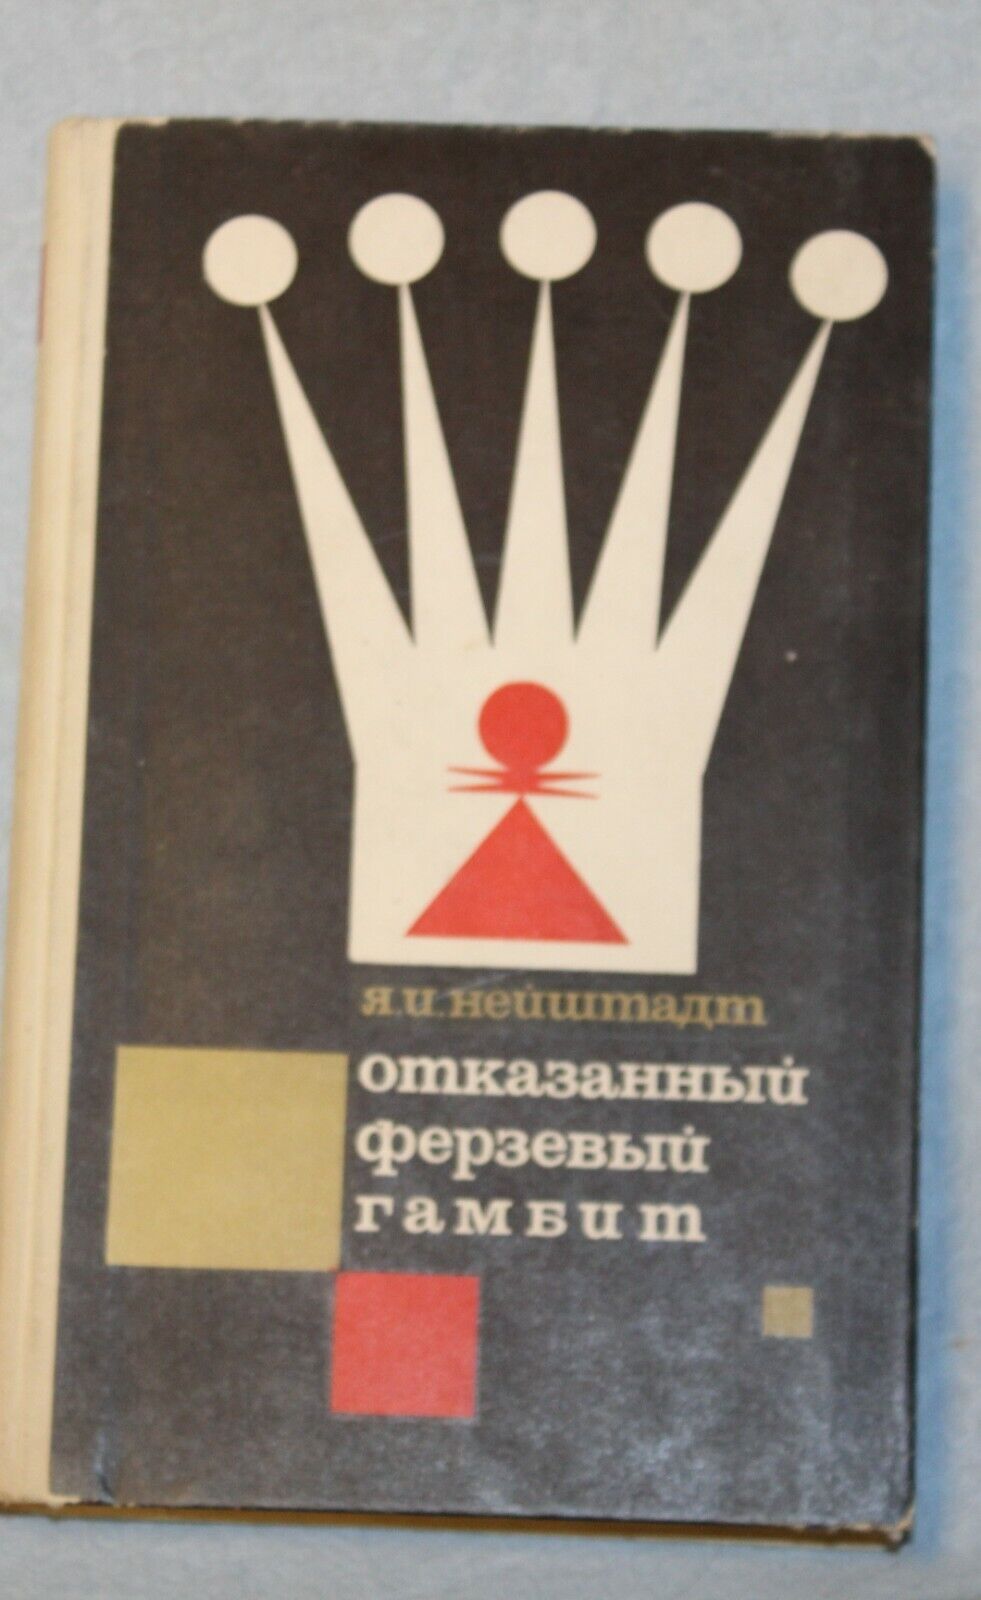 11697.Soviet Chess Book signed by  Yakov Neishtadt. Rejected Queen's gambit. 1967